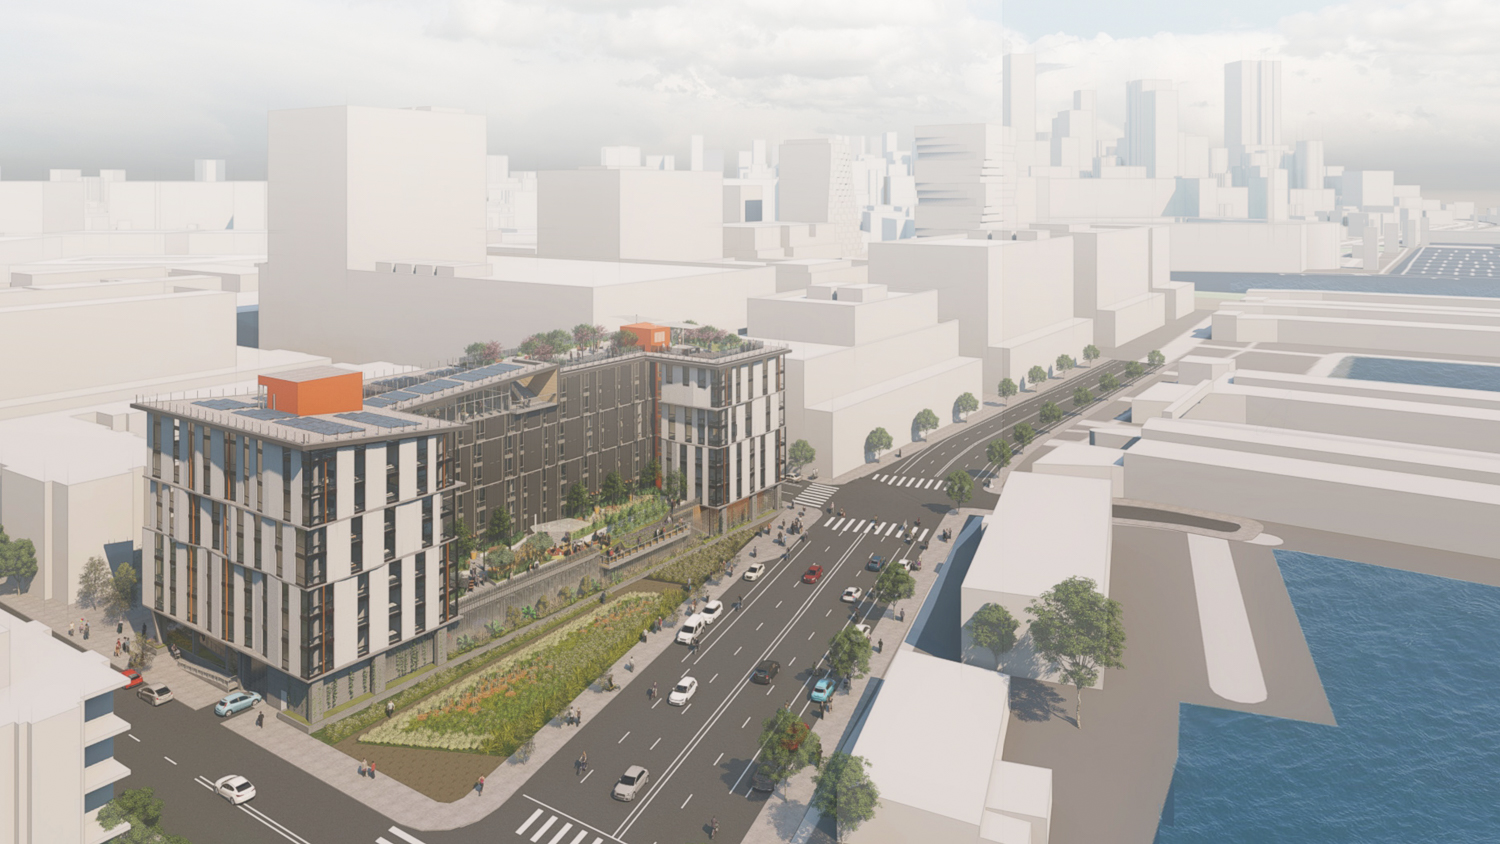 Block 9A design at 400 China Basin Street southeast aerial view, rendering by Mithun